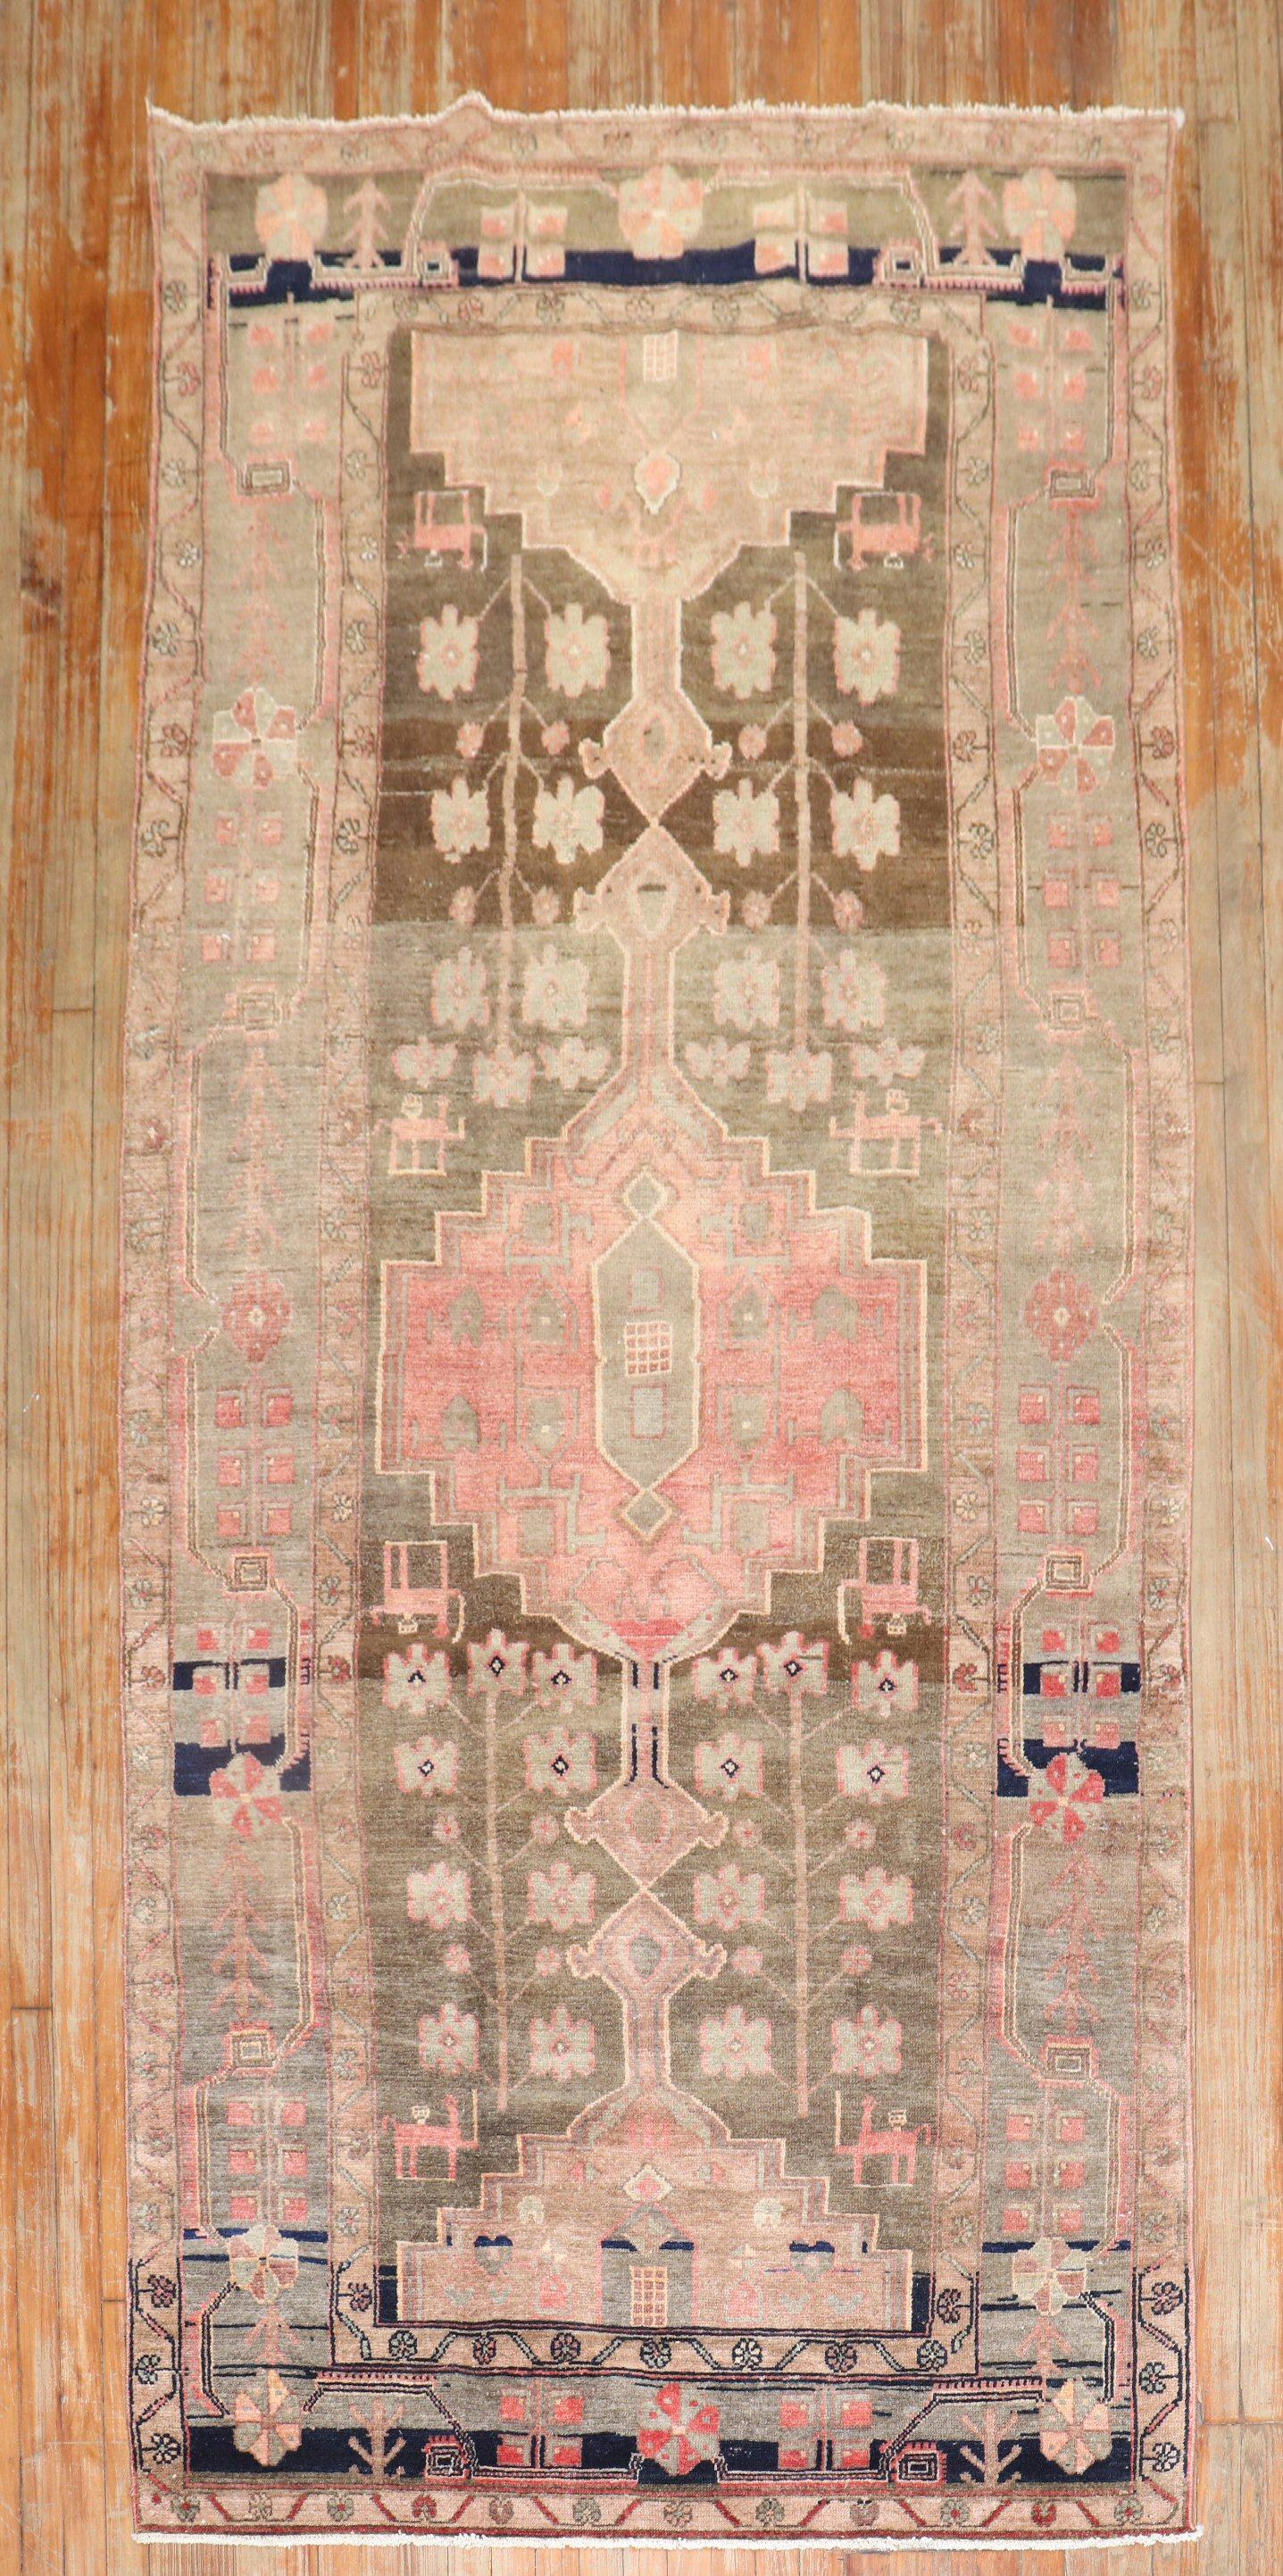 Quirky Gallery size Vintage Tribal persian gallery Runner.

Measures: 4'8'' x 10'5''